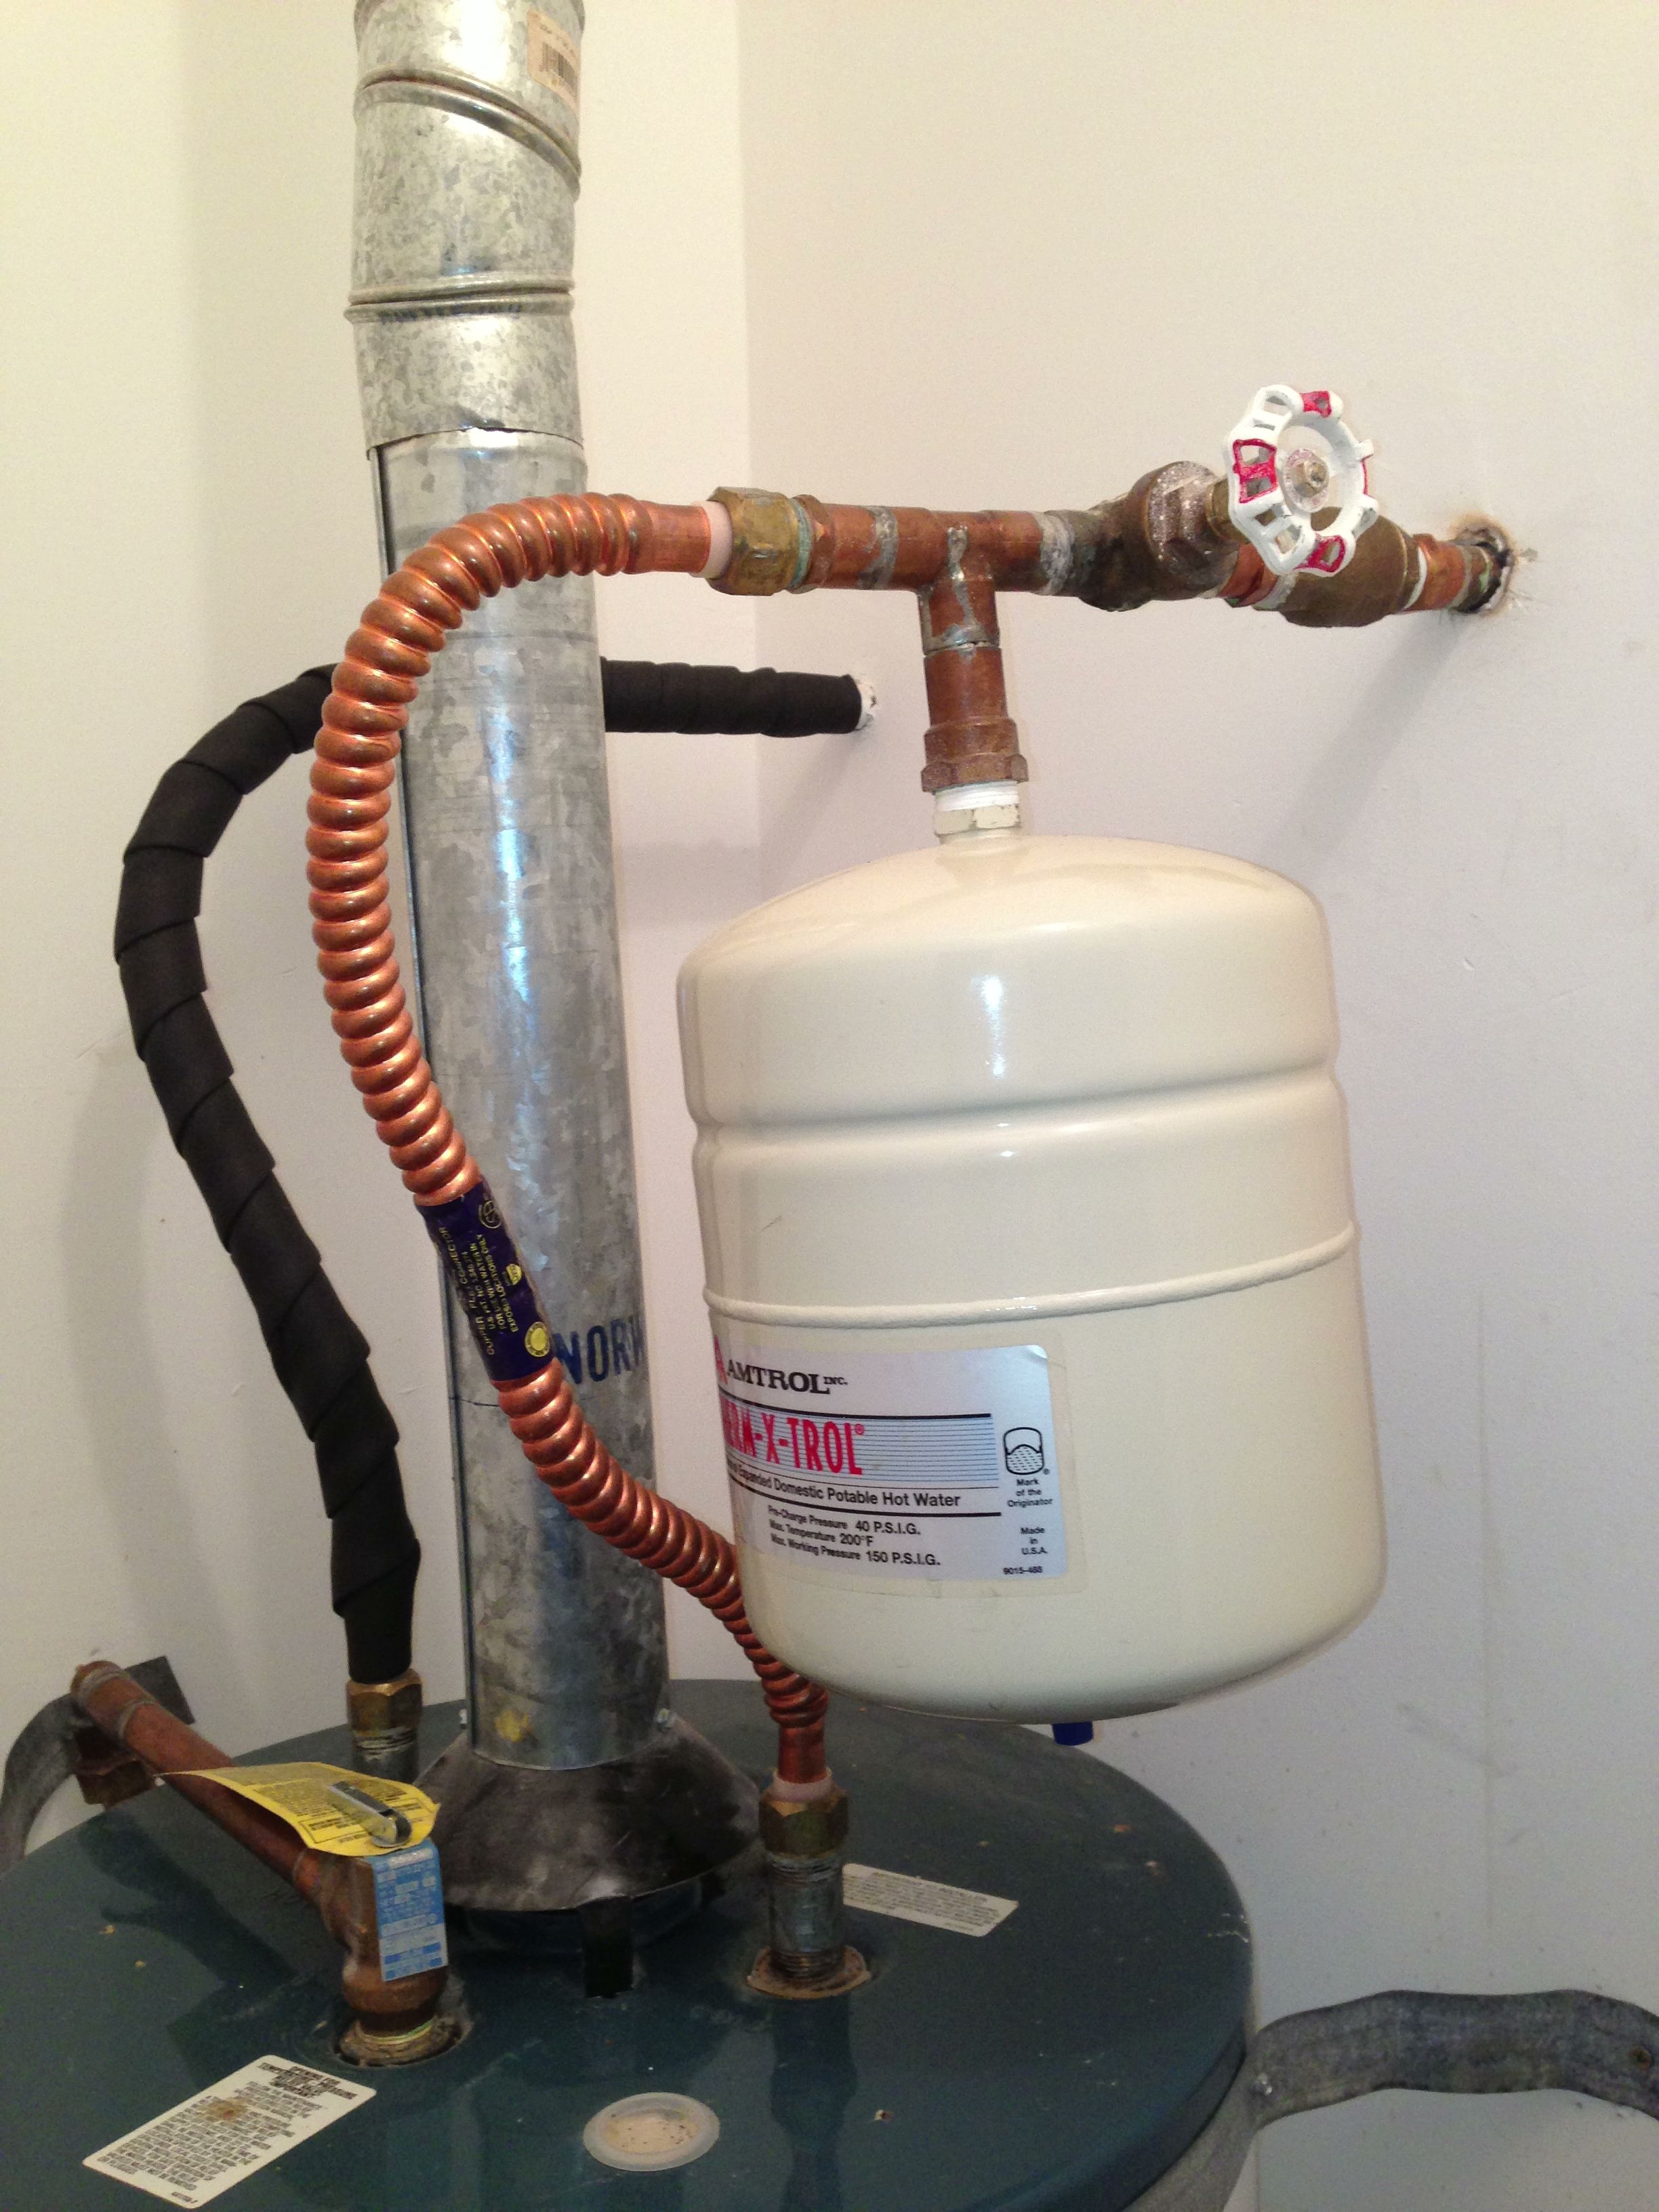 Who Can I Call To Check My Water Heater